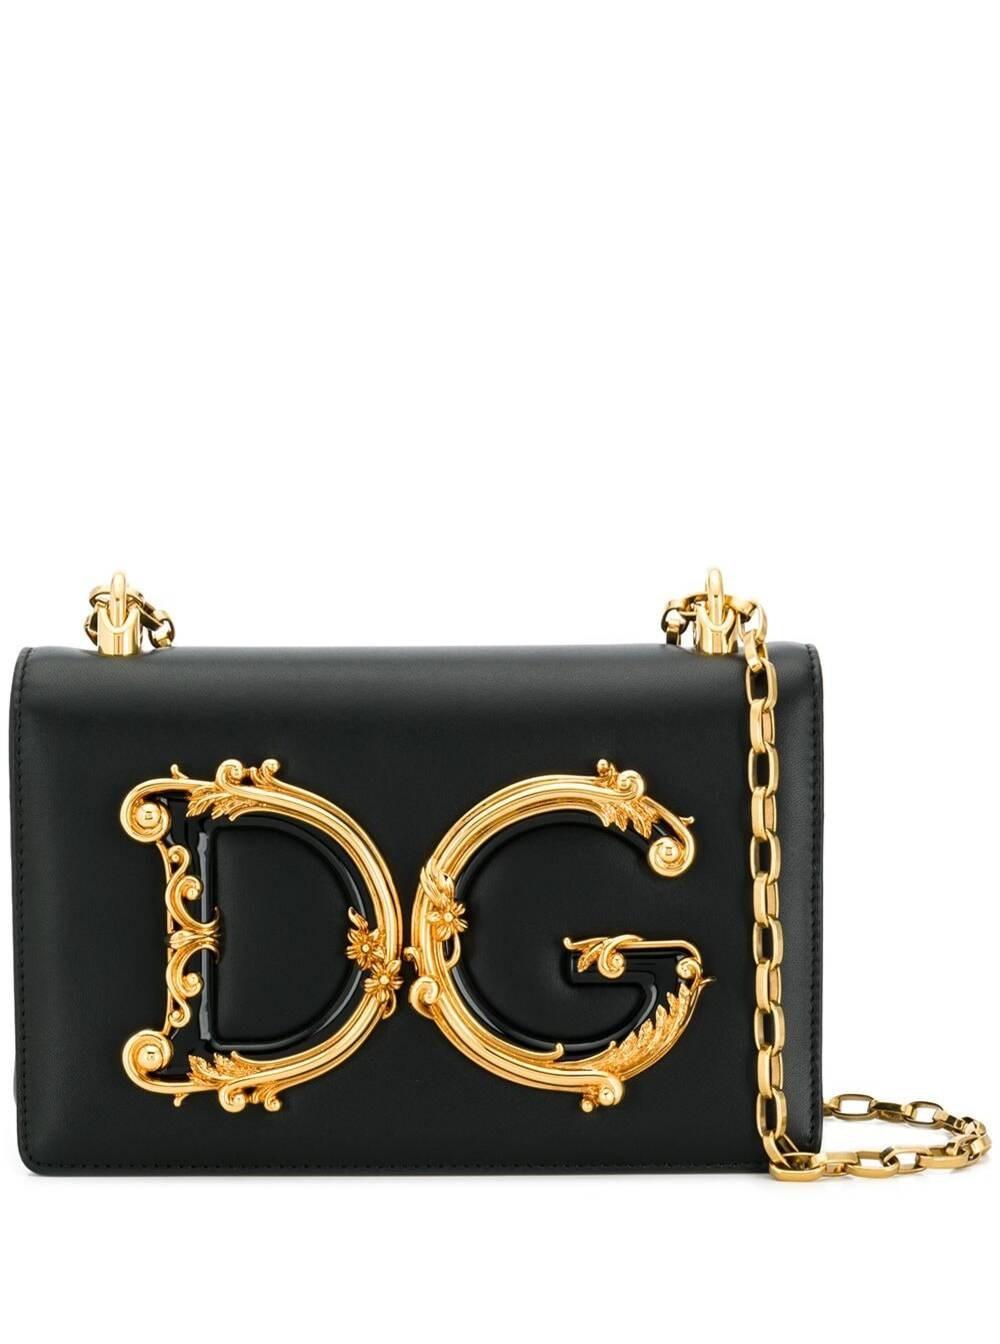 Dolce & Gabbana Black Barocco Ccrossbody Bag With Chain Shoulder Strap And  Monogram Plate On The Front Woman | Lyst